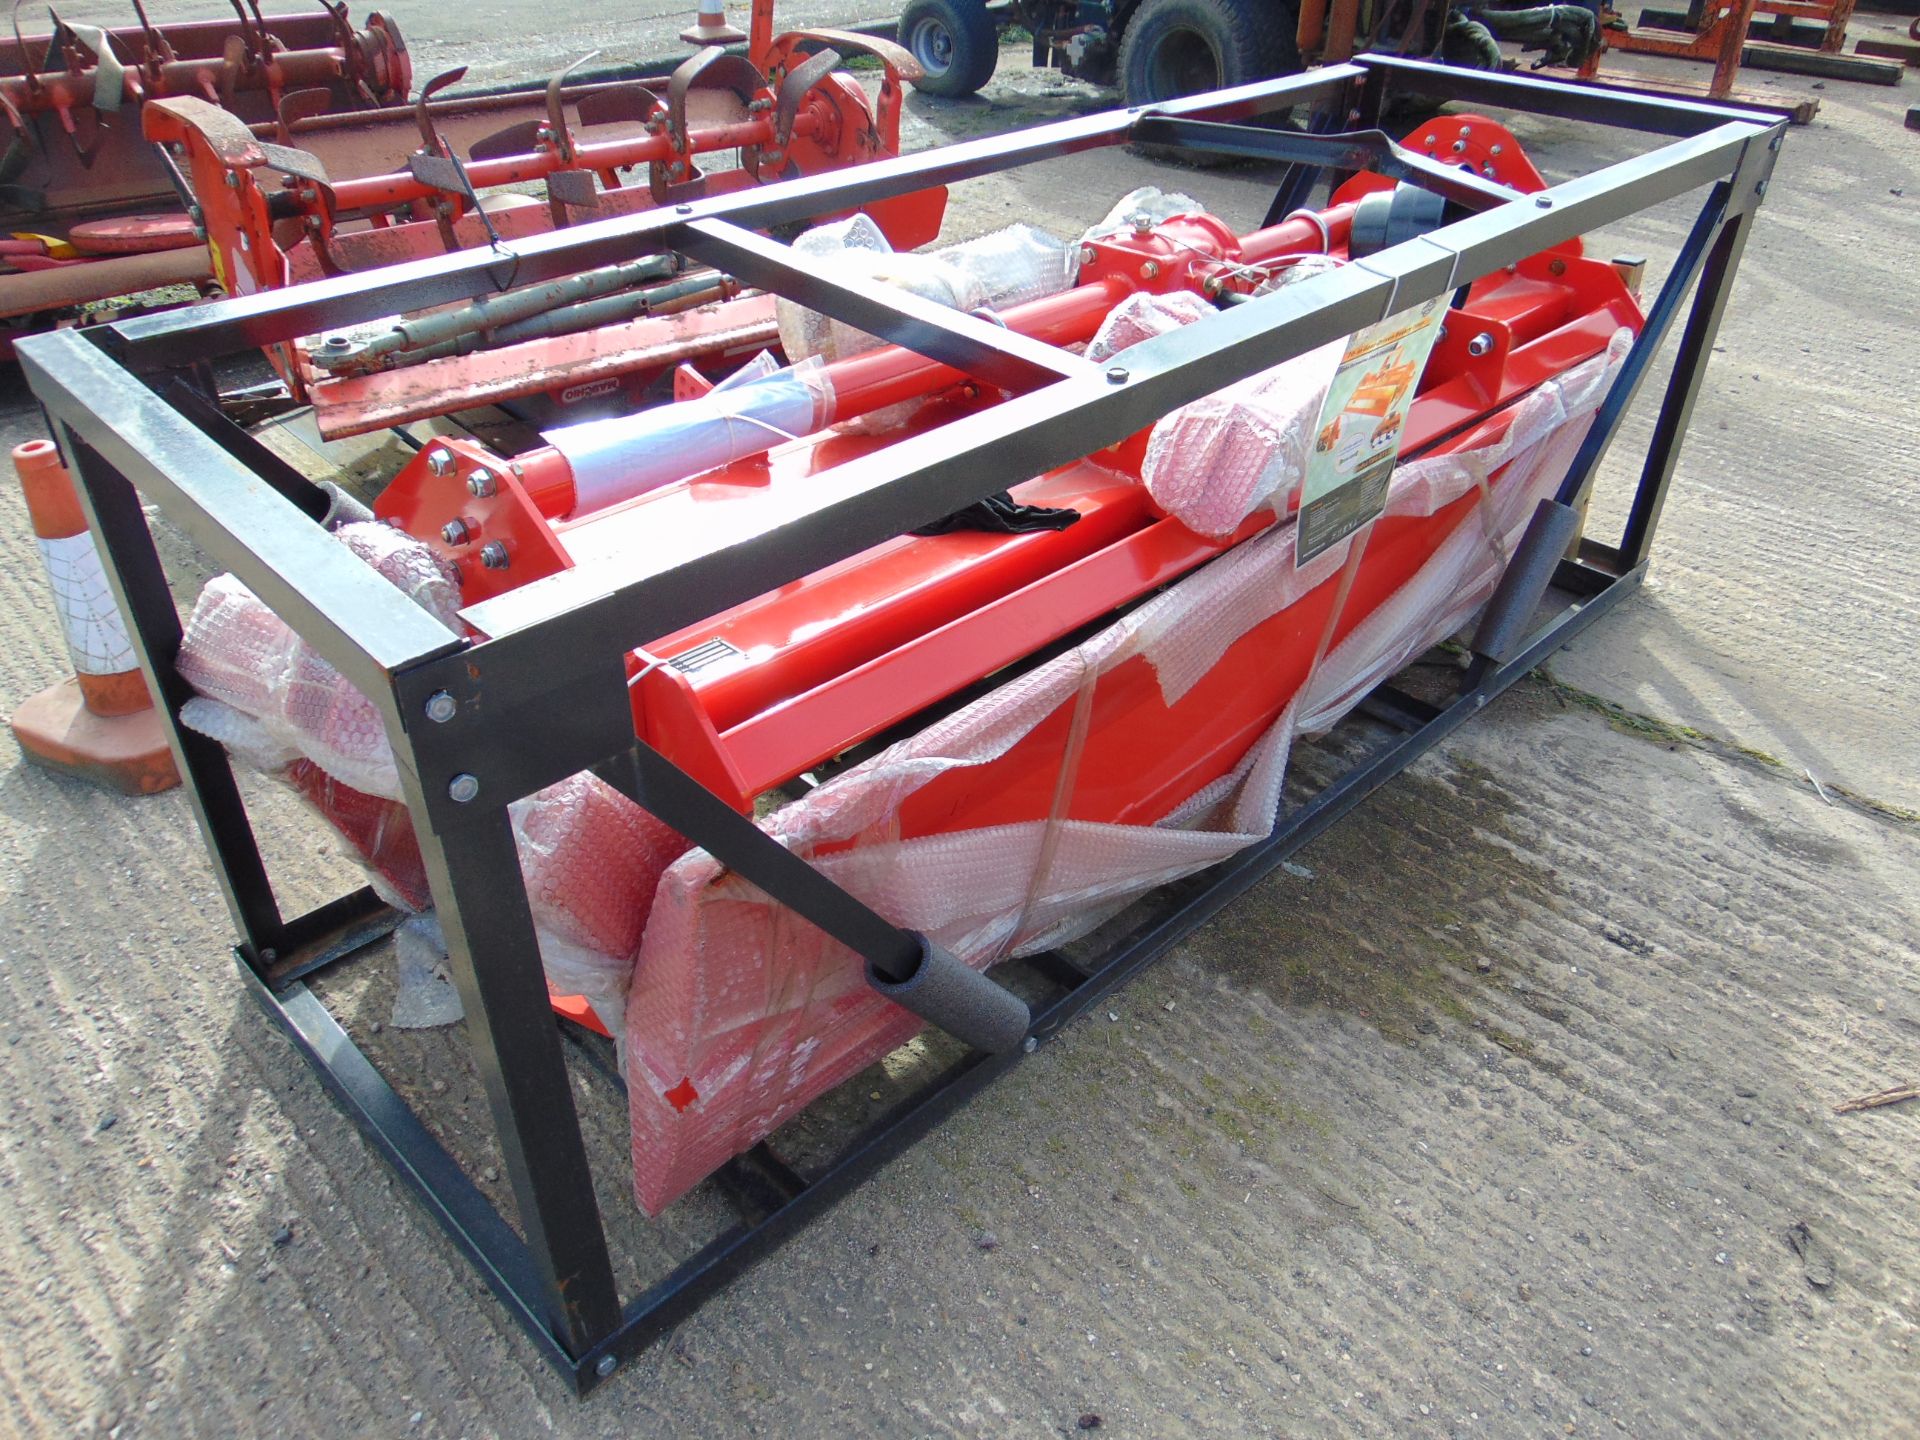 ** BRAND NEW ** TMG-RT175 Rotary Tiller 3 Point Hitch Mount Gear-Driven 70'' Working Width - Image 3 of 6